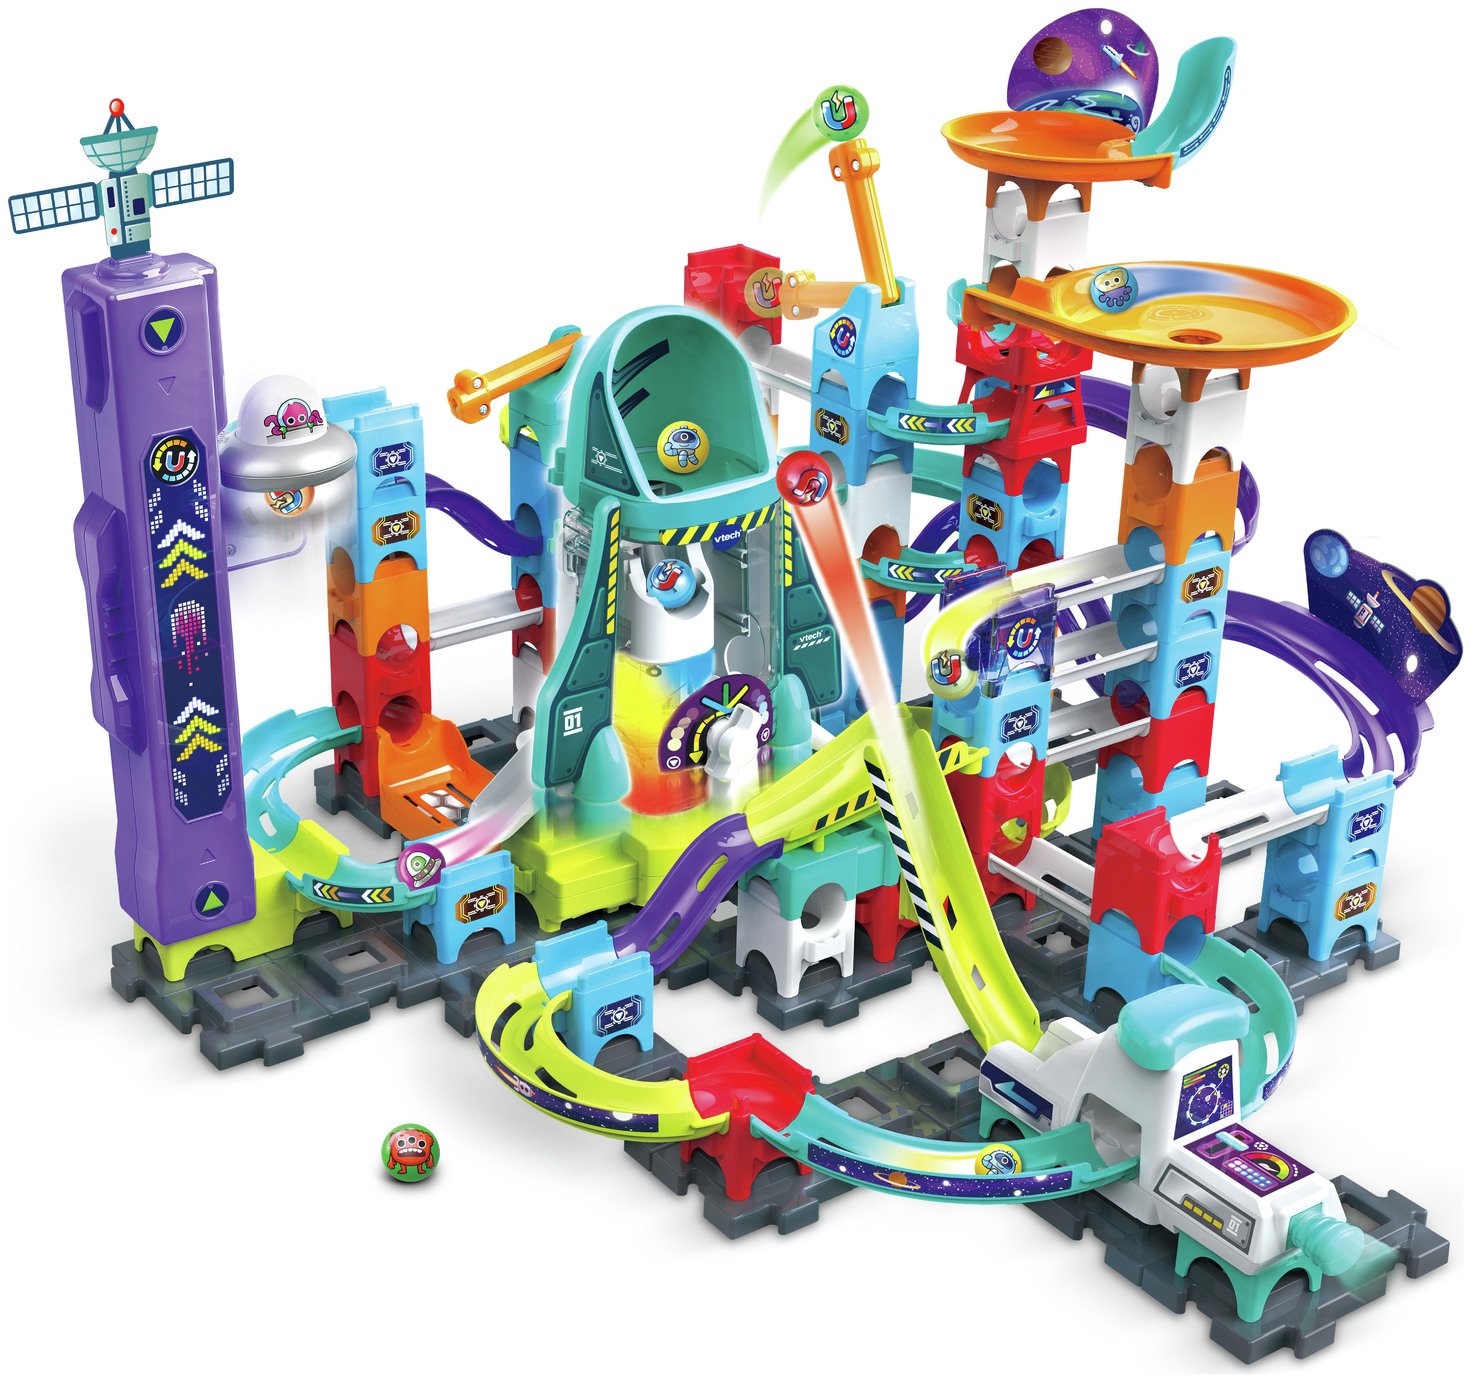 Vtech Marble Rush Magnetic Power Playset